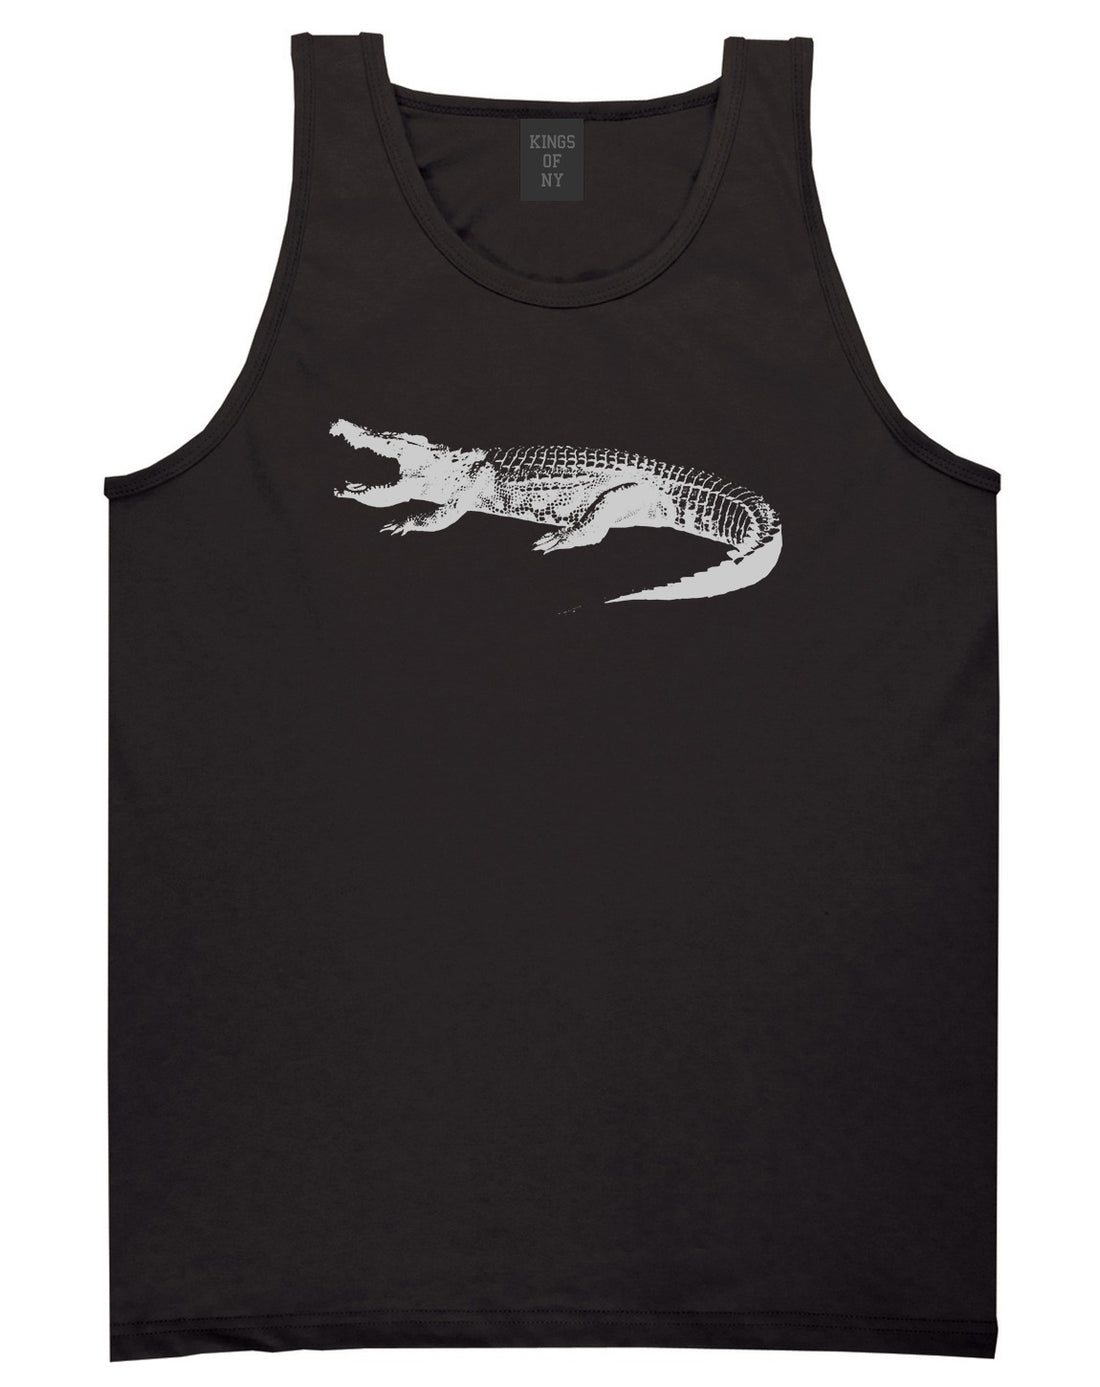 Alligator Black Tank Top Shirt by Kings Of NY